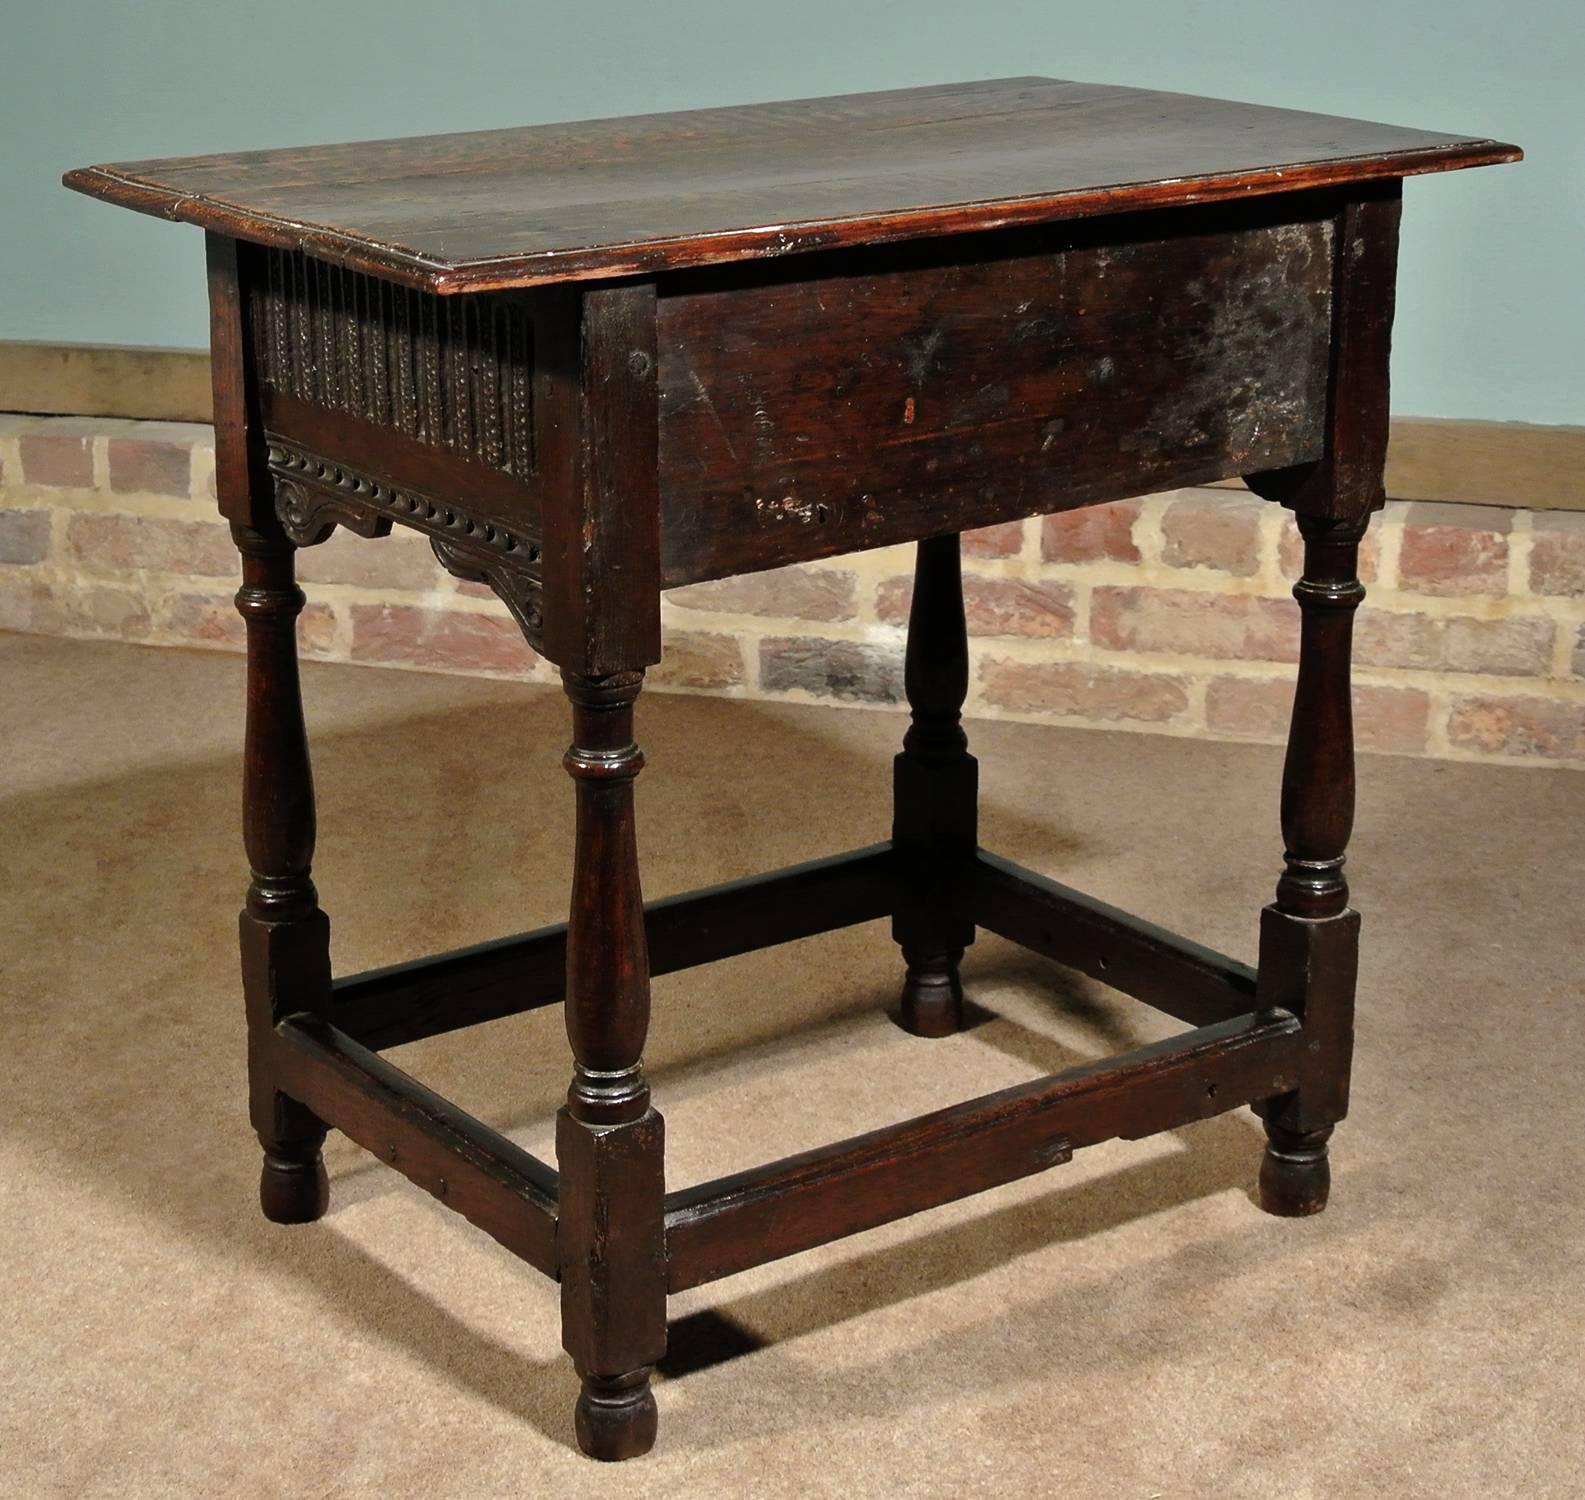 Mid-17th Century Early 17th Century Oak Lowboy with Provenance from Groombridge Place in Kent